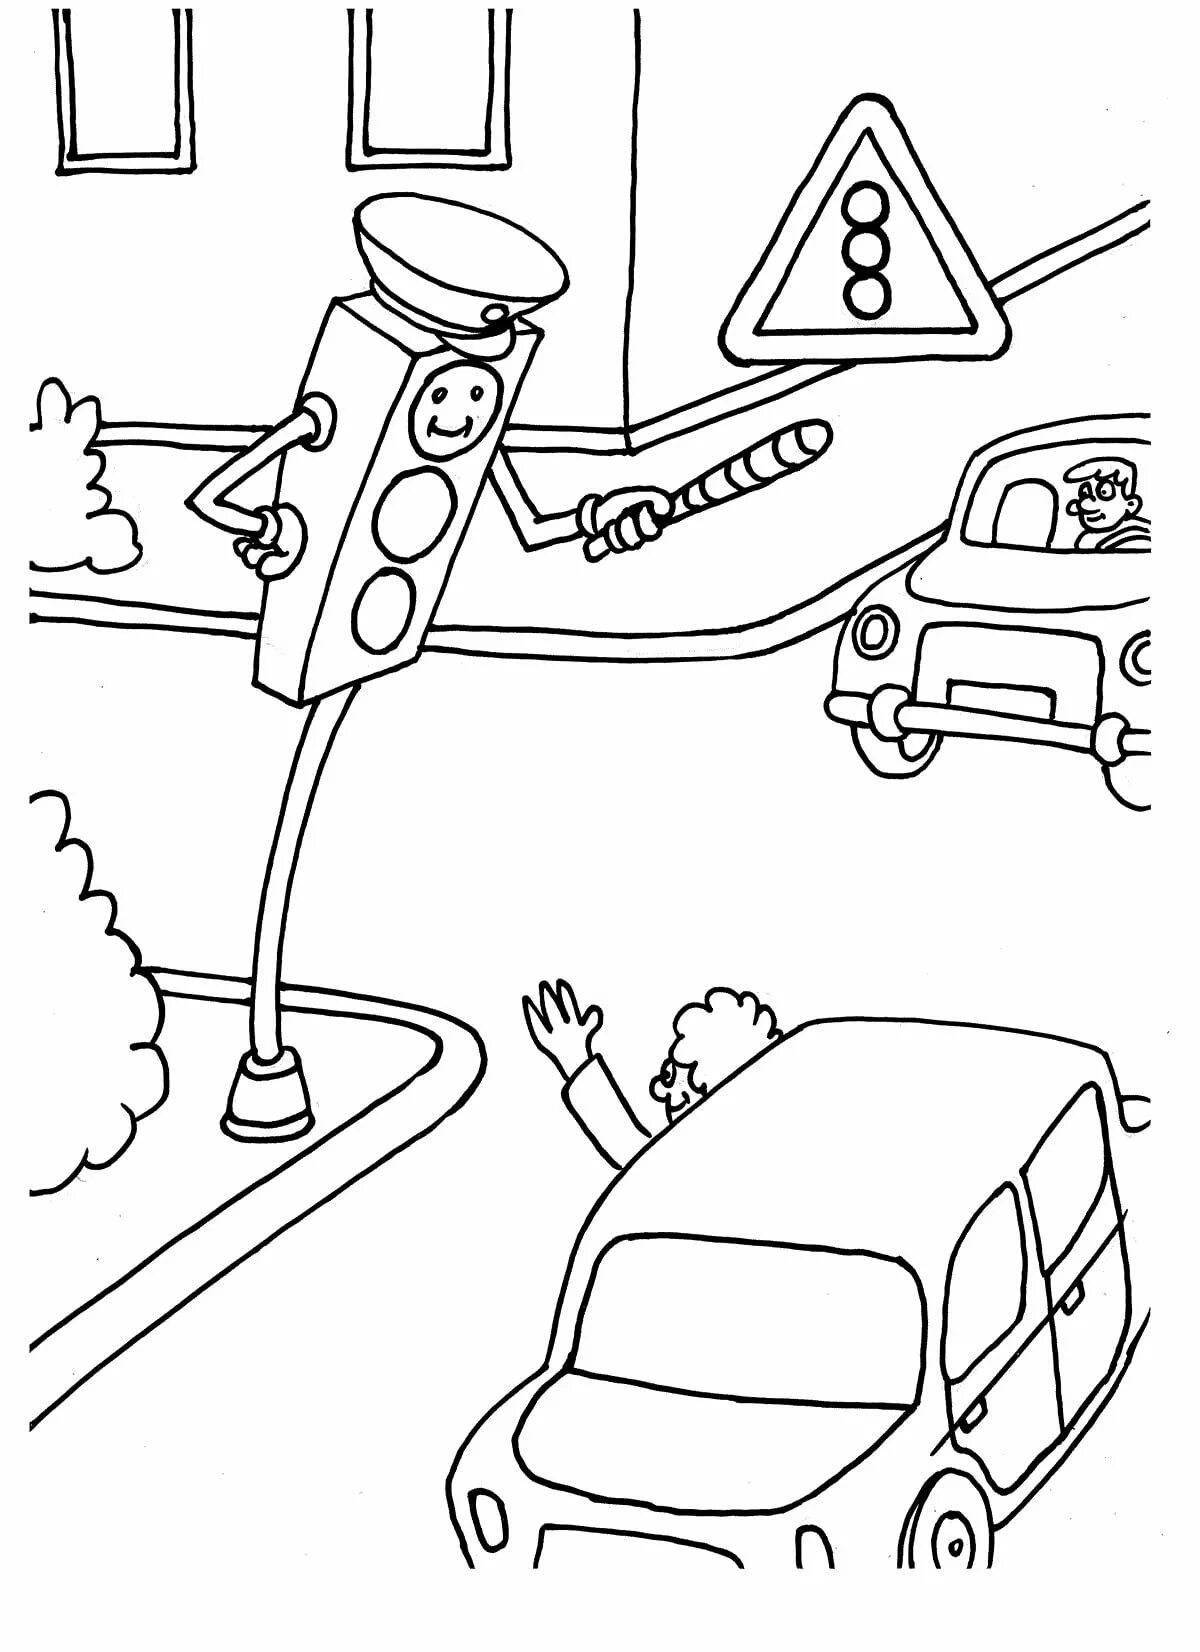 Funny road safety coloring book for students